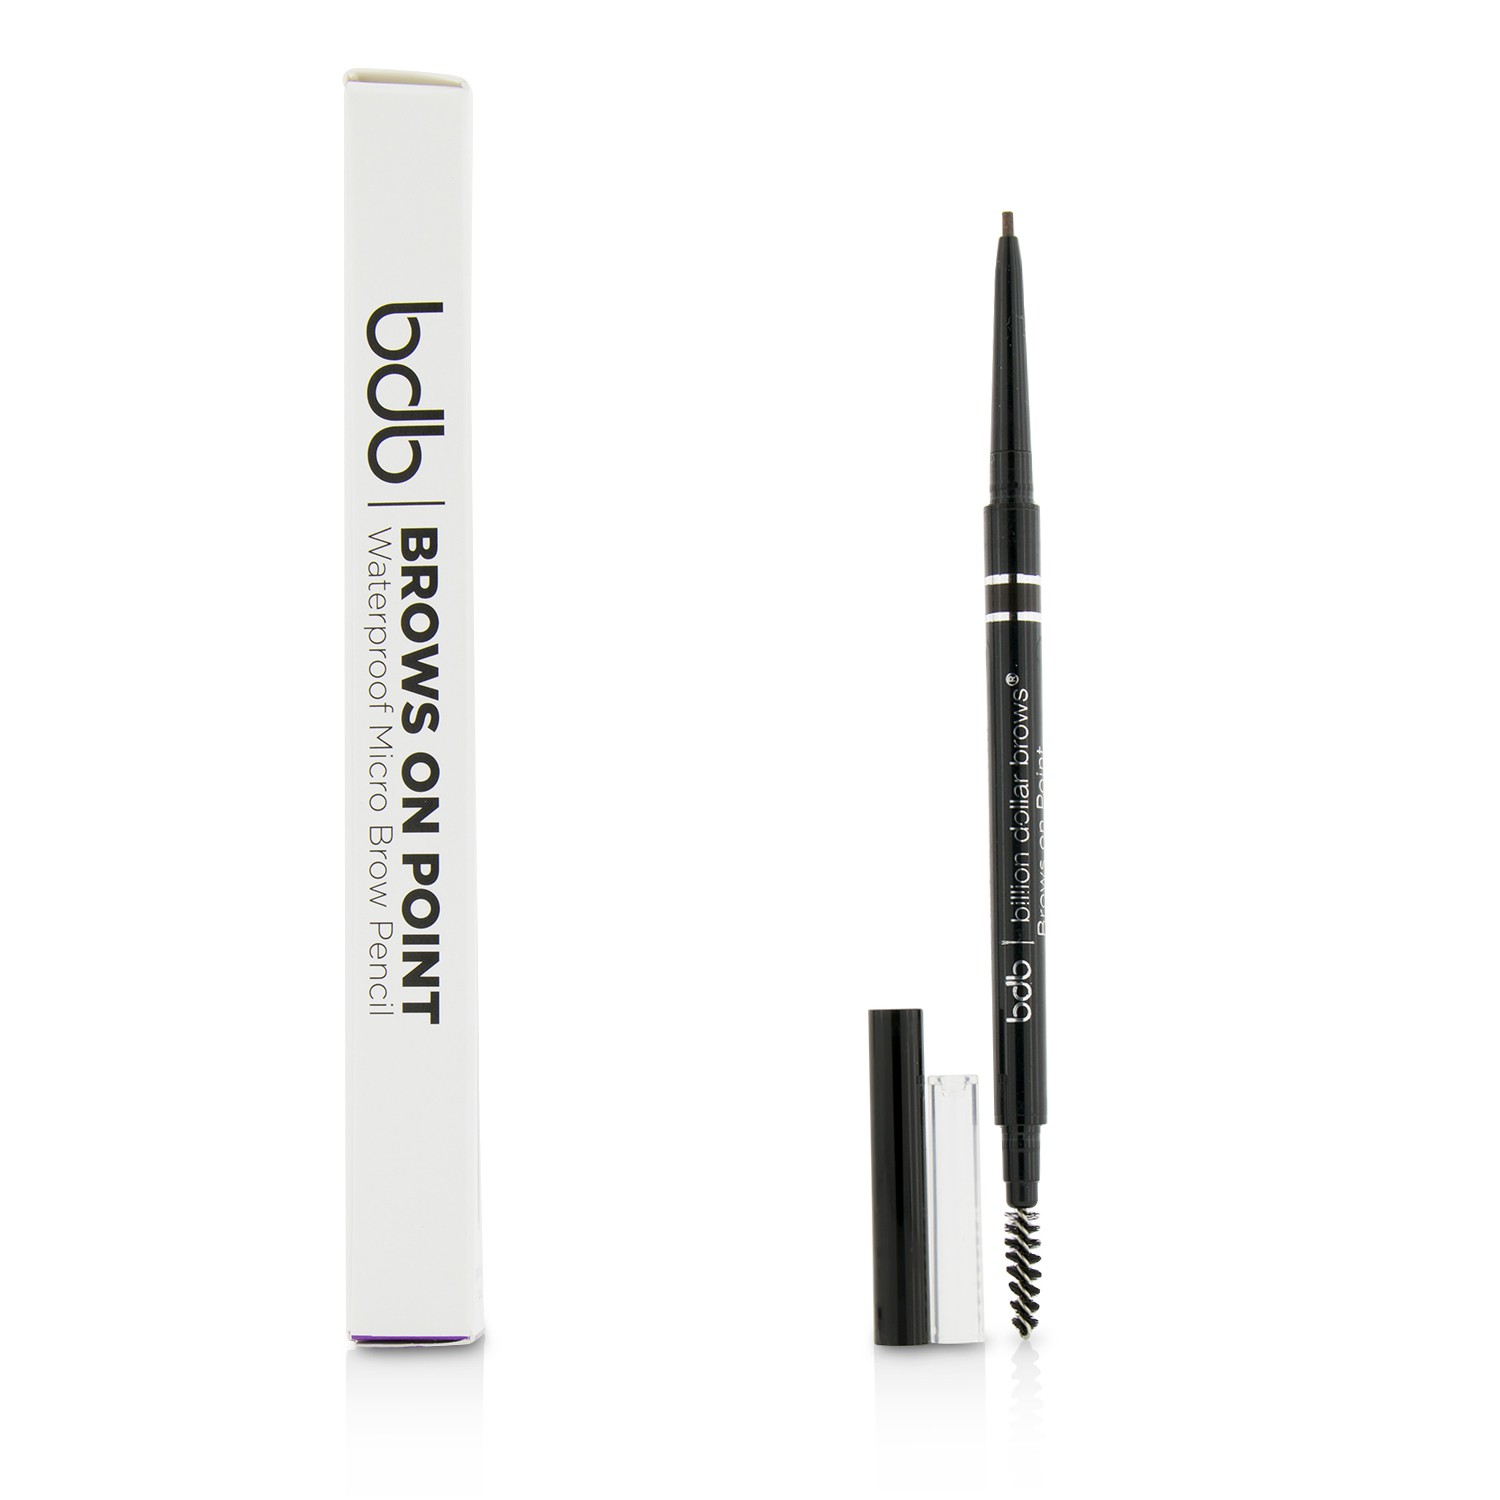 Brows On Point Waterproof Micro Brow Pencil - Raven Billion Dollar Brows Image